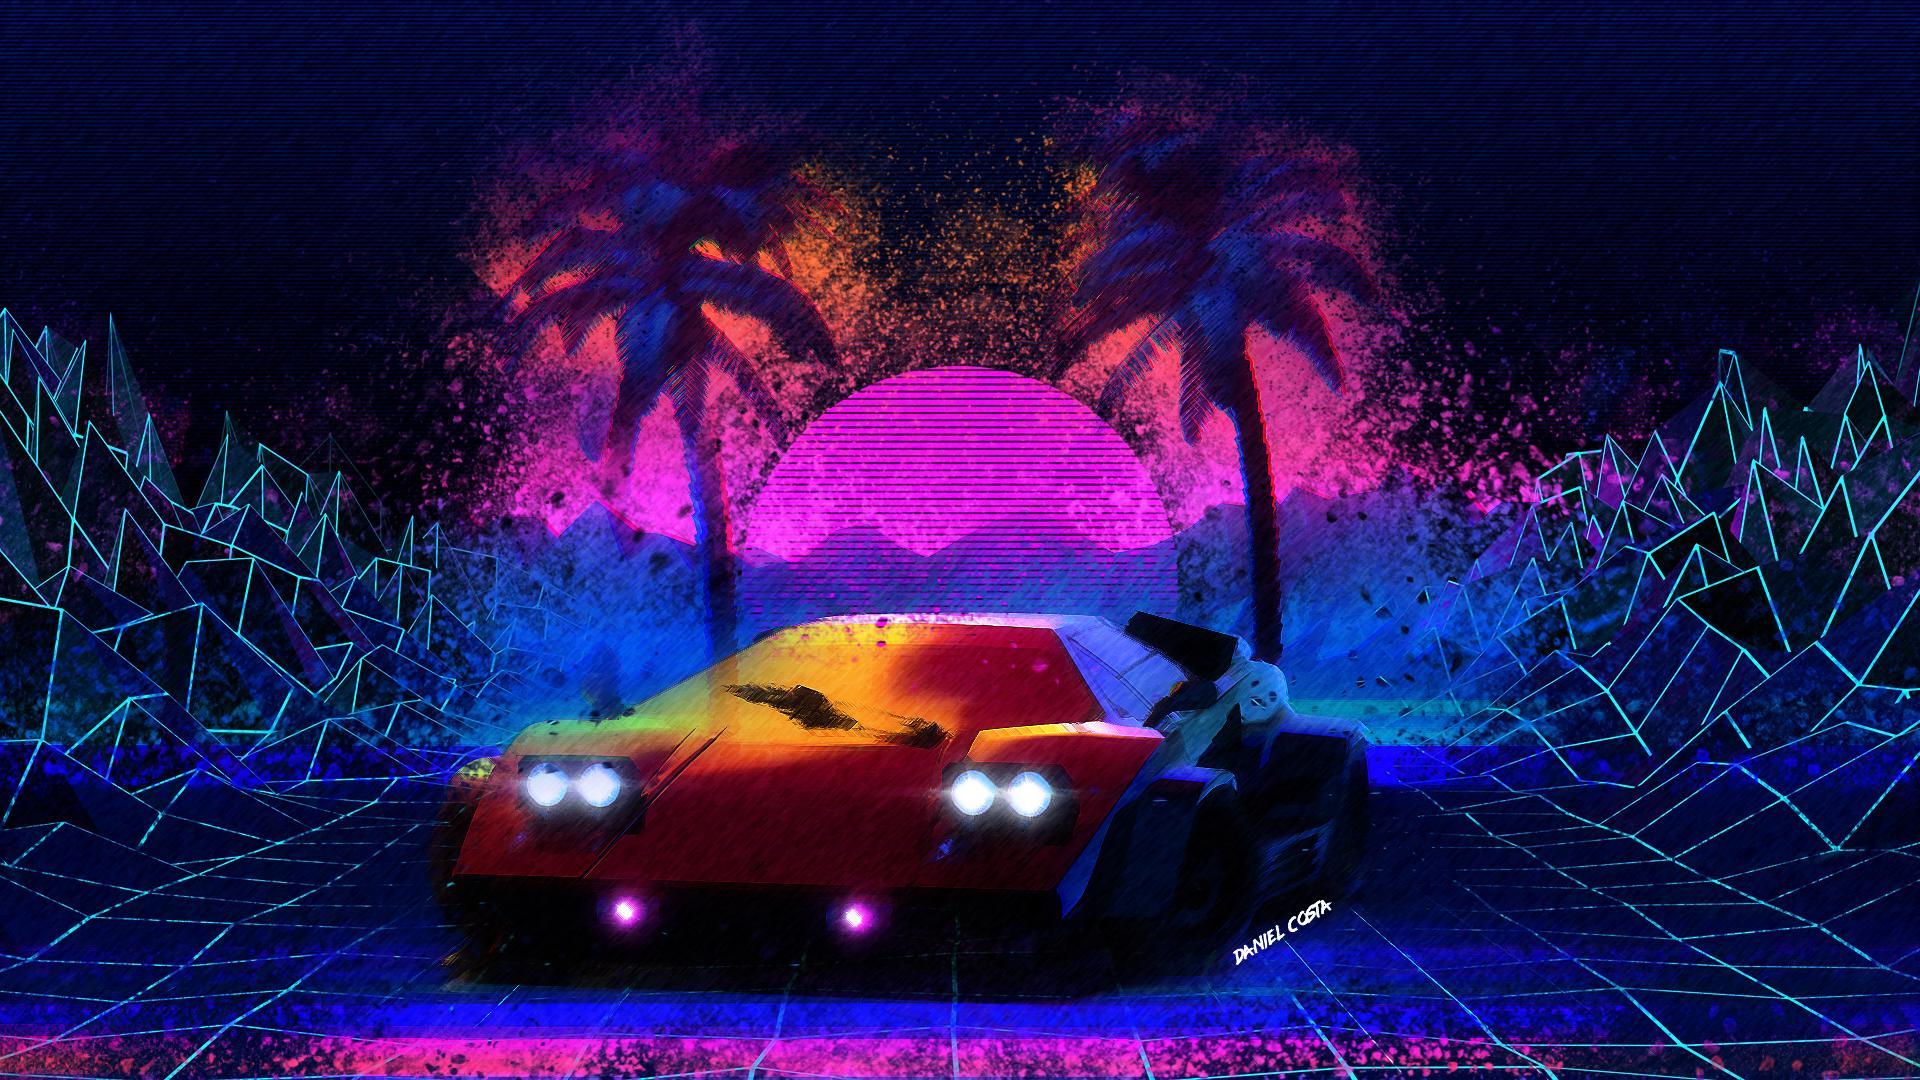 General Synthwave 1980s Car Retrowave Aesthetic Wallpaper